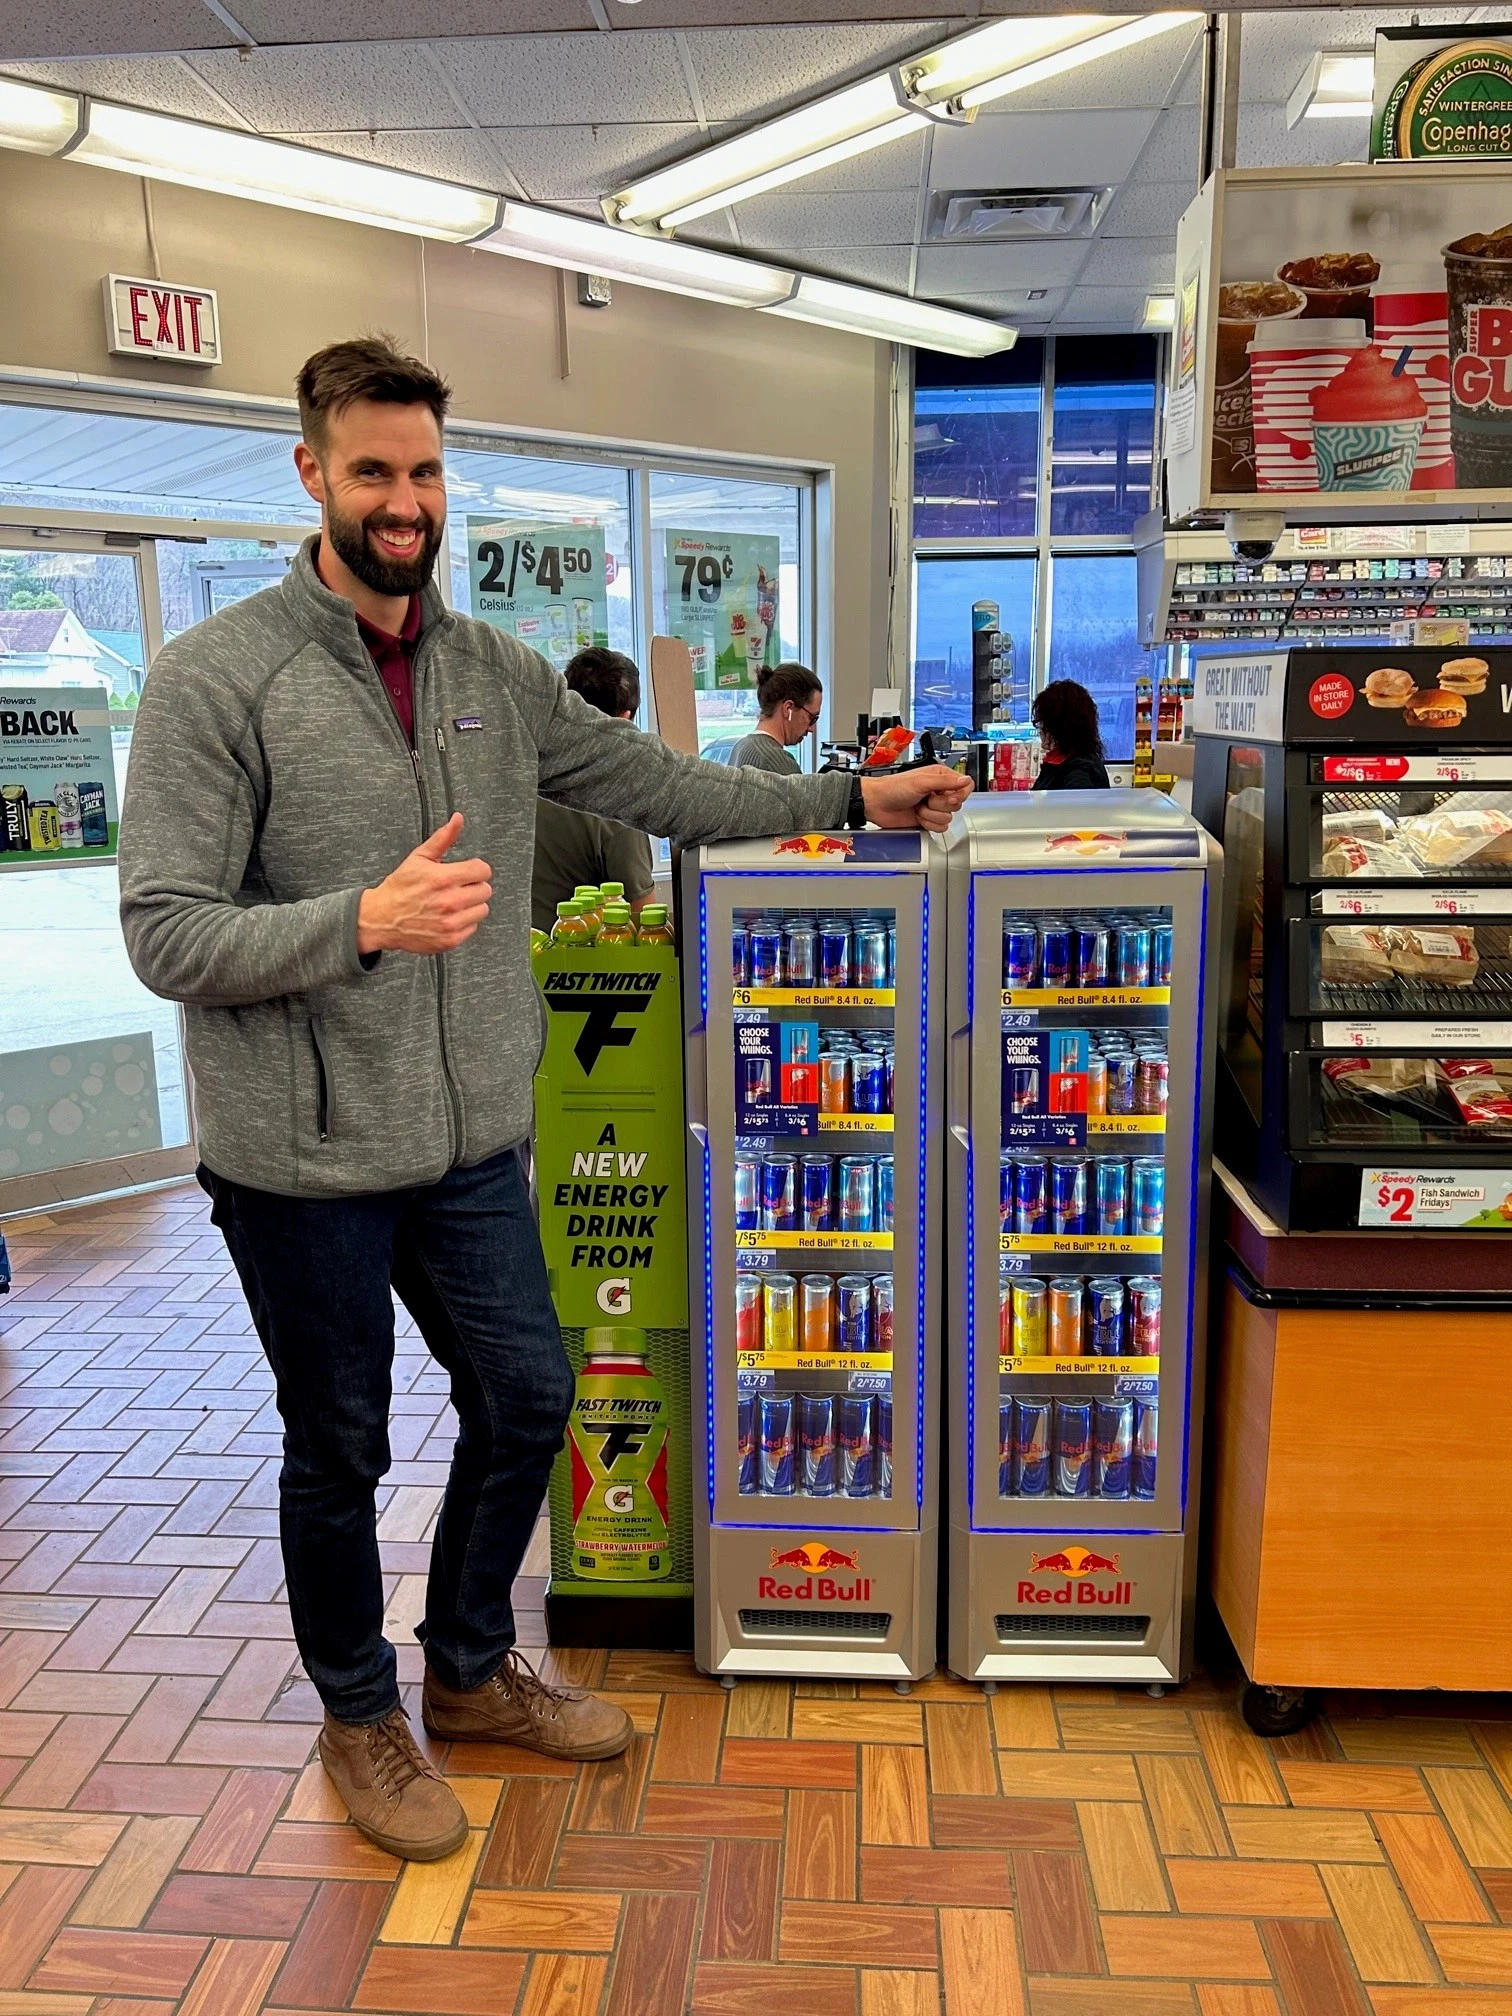 Dixie employee standing next to a Red Bull fridge